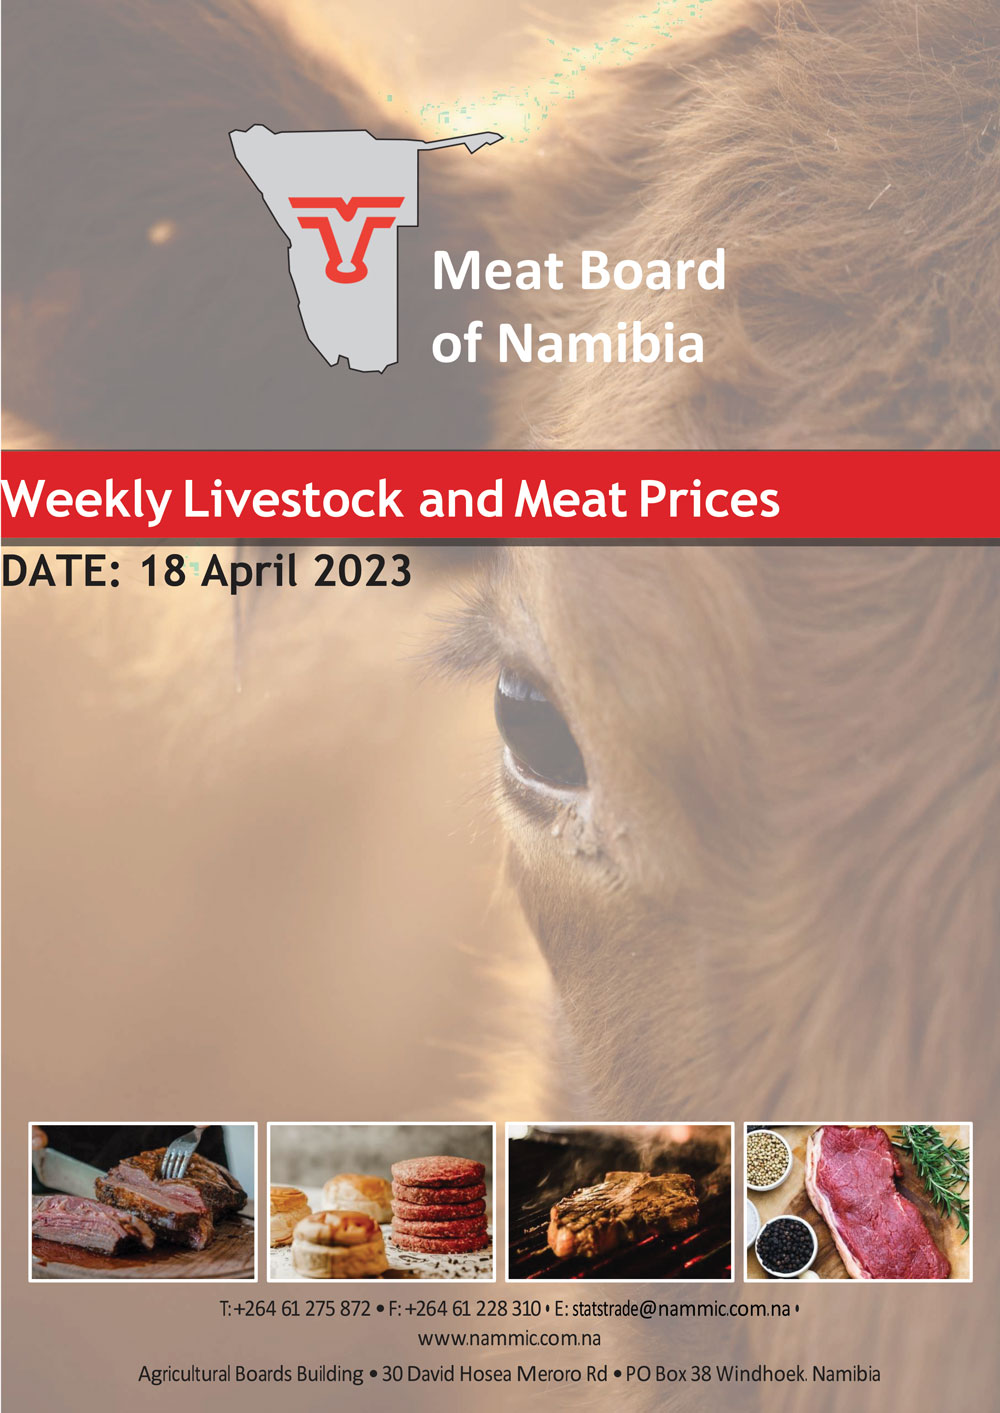 Weekly Livestock and Meat Prices – DATE: 18 April 2023